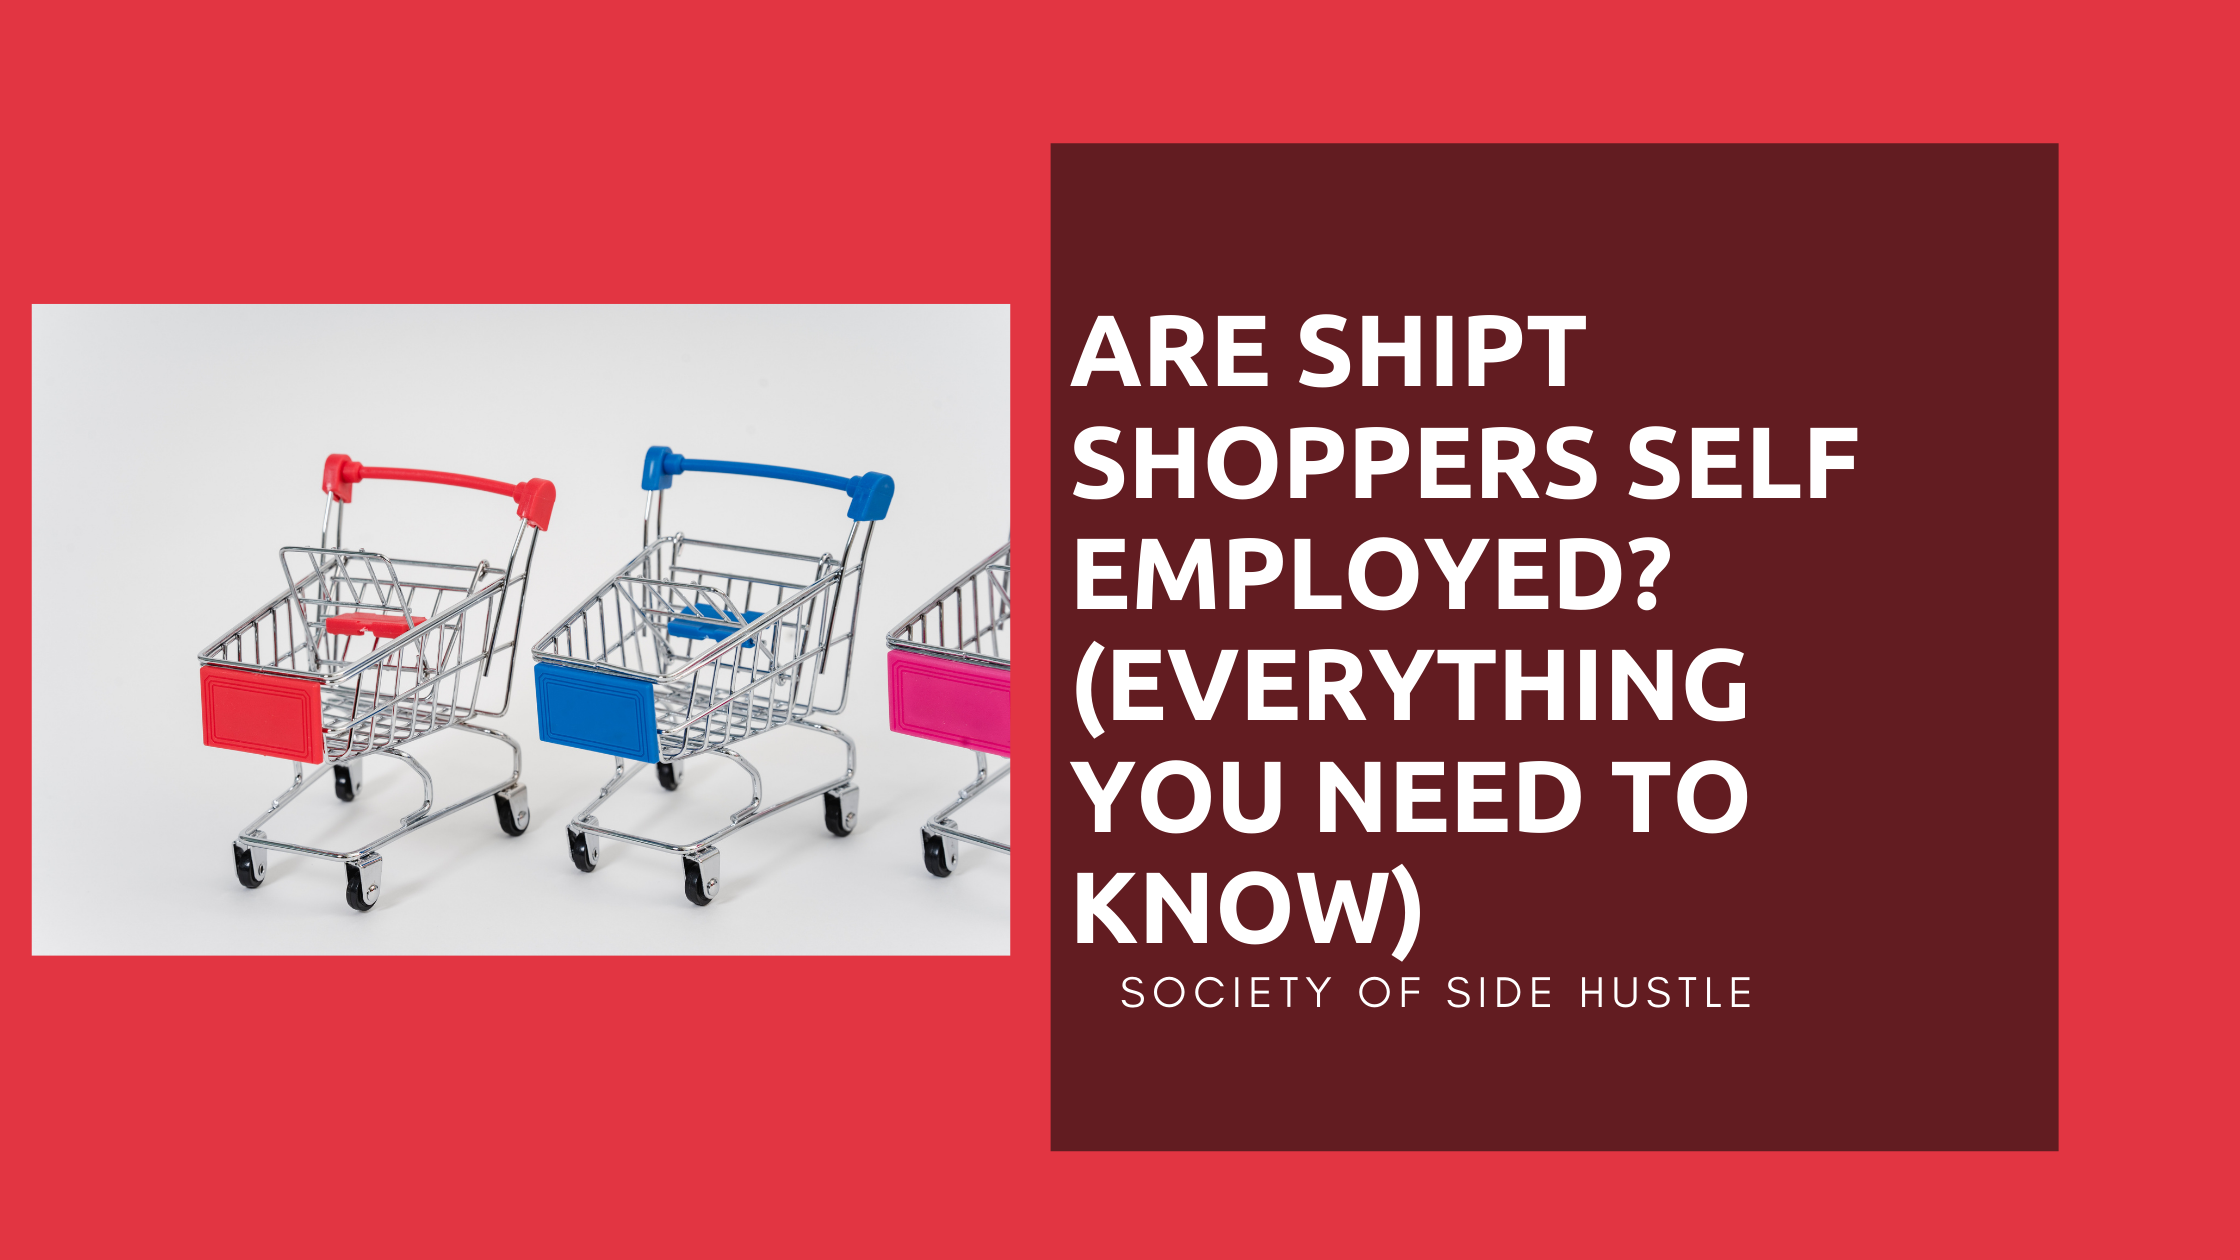 Are Shipt Shoppers Self Employed?(Everything you Need To Know)